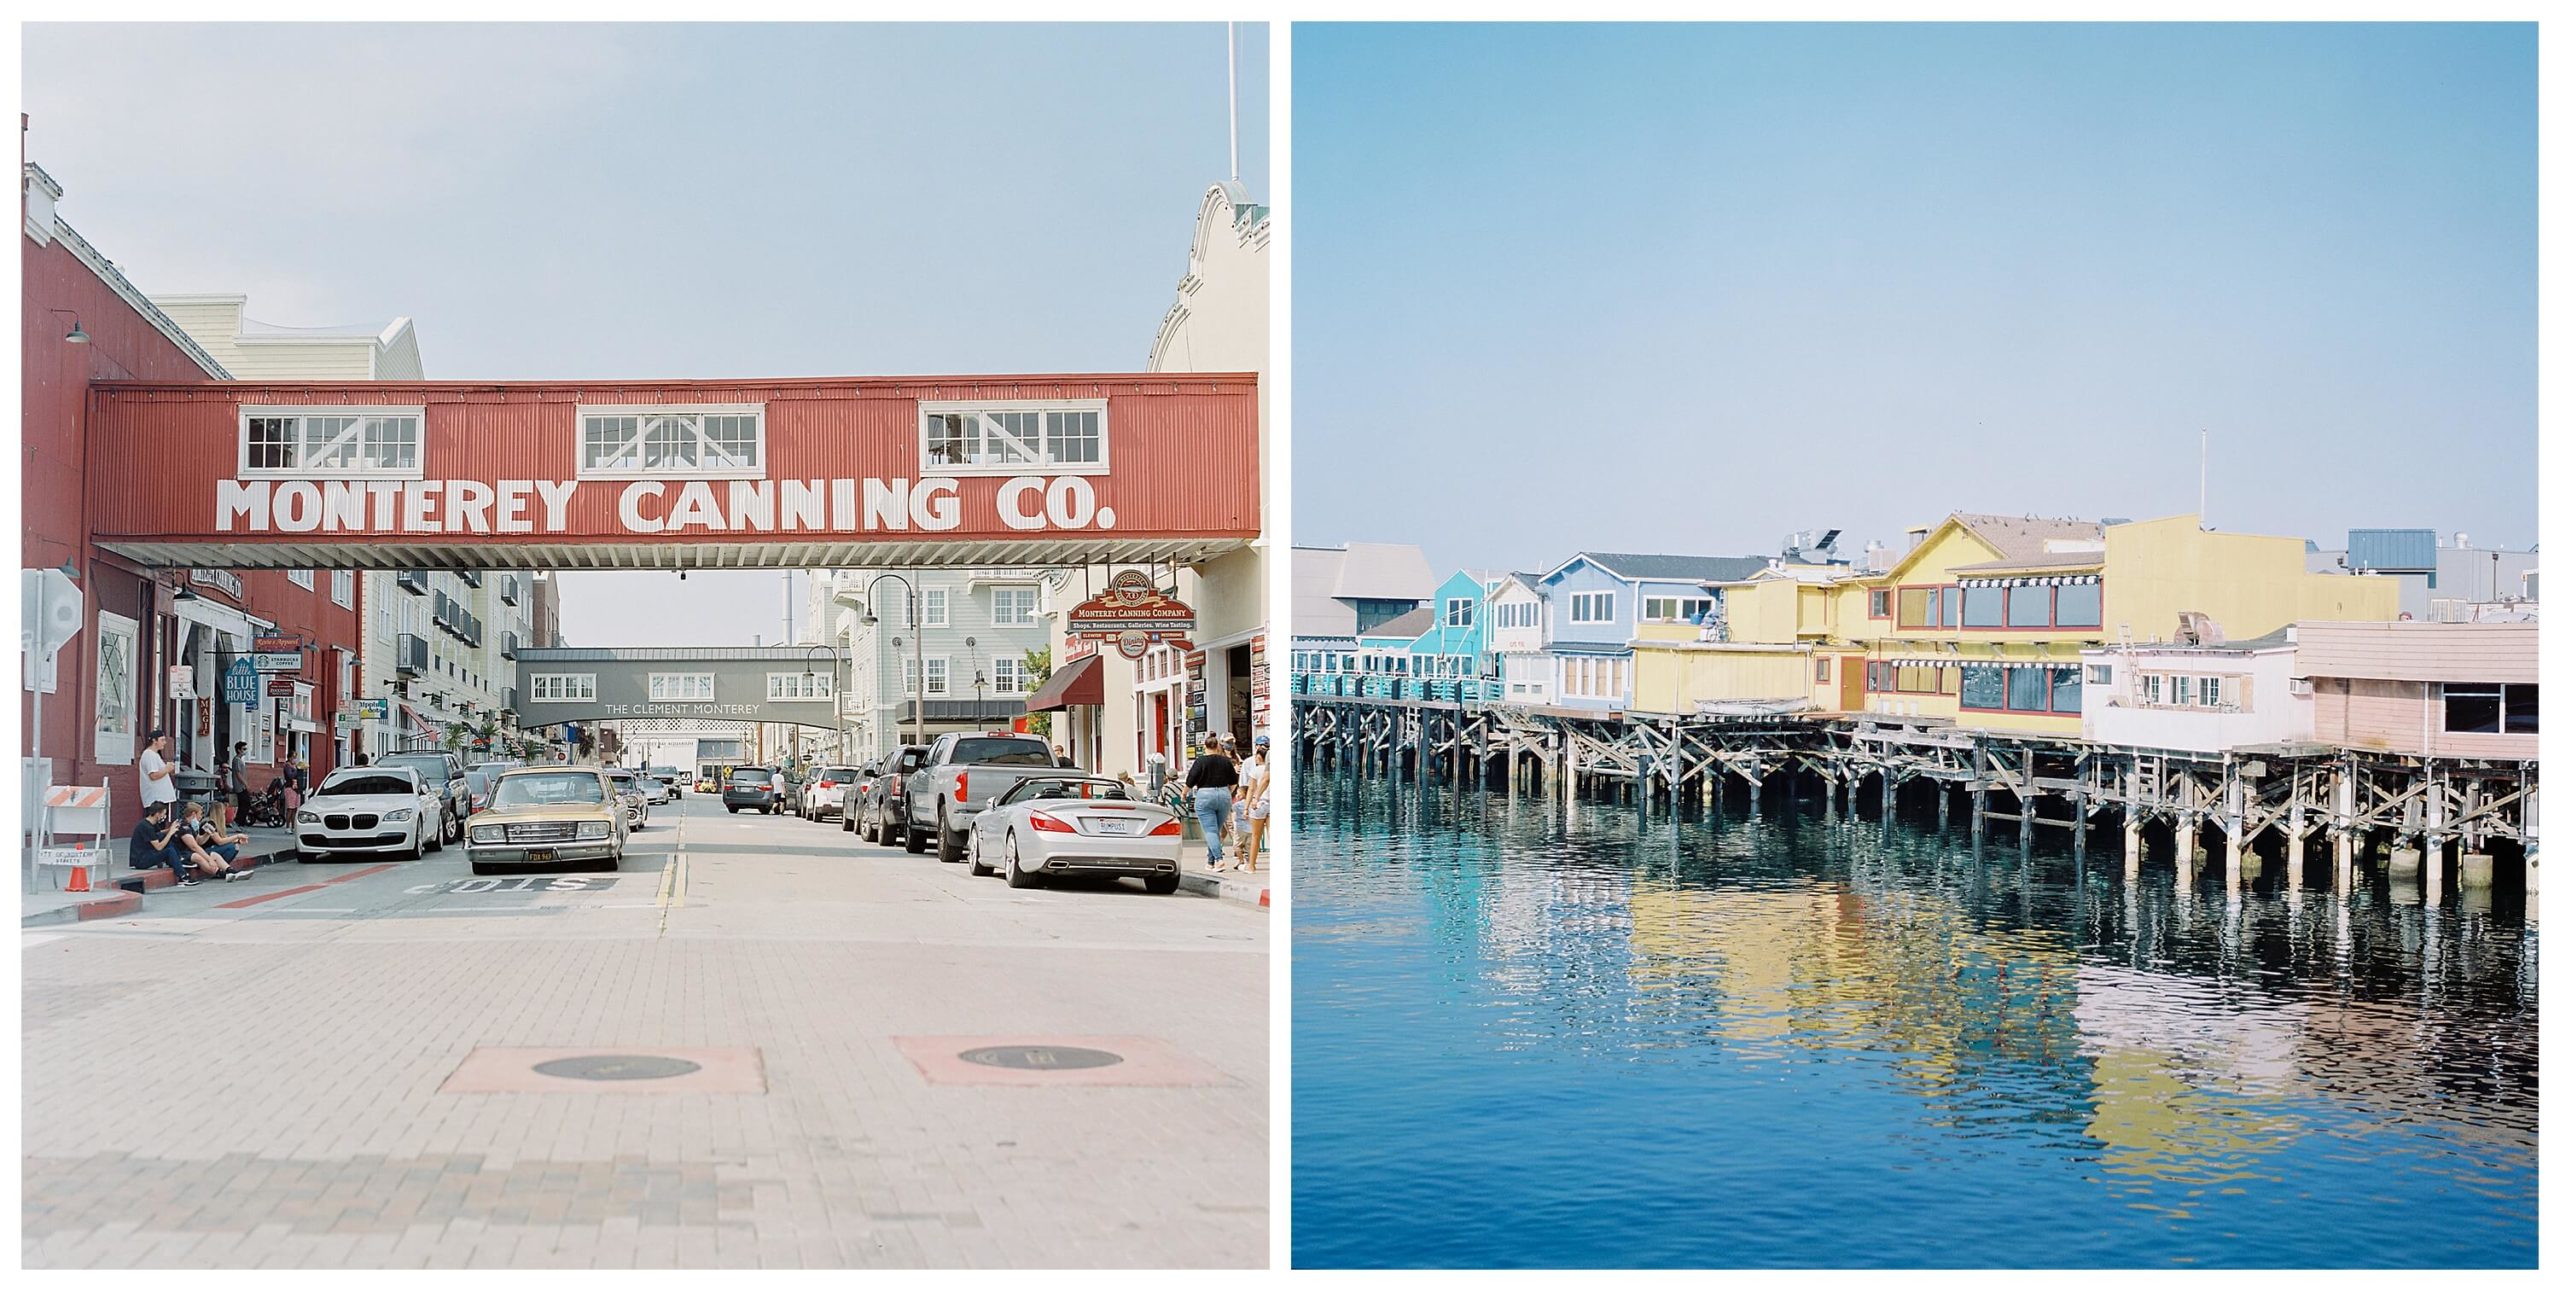 Left: A vintage car sits at the stop sign in front of a skywalk that straddles Cannery Row. The skywalk, a burnt orange-red color, reads "Monterey Canning Co." in large, capital white letters. Right: Old Fishermans Wharf, which sits on the water, boasts colorful yellow, pink, and blue buildings which are reflected in the water below. They sit, raised on the piers.